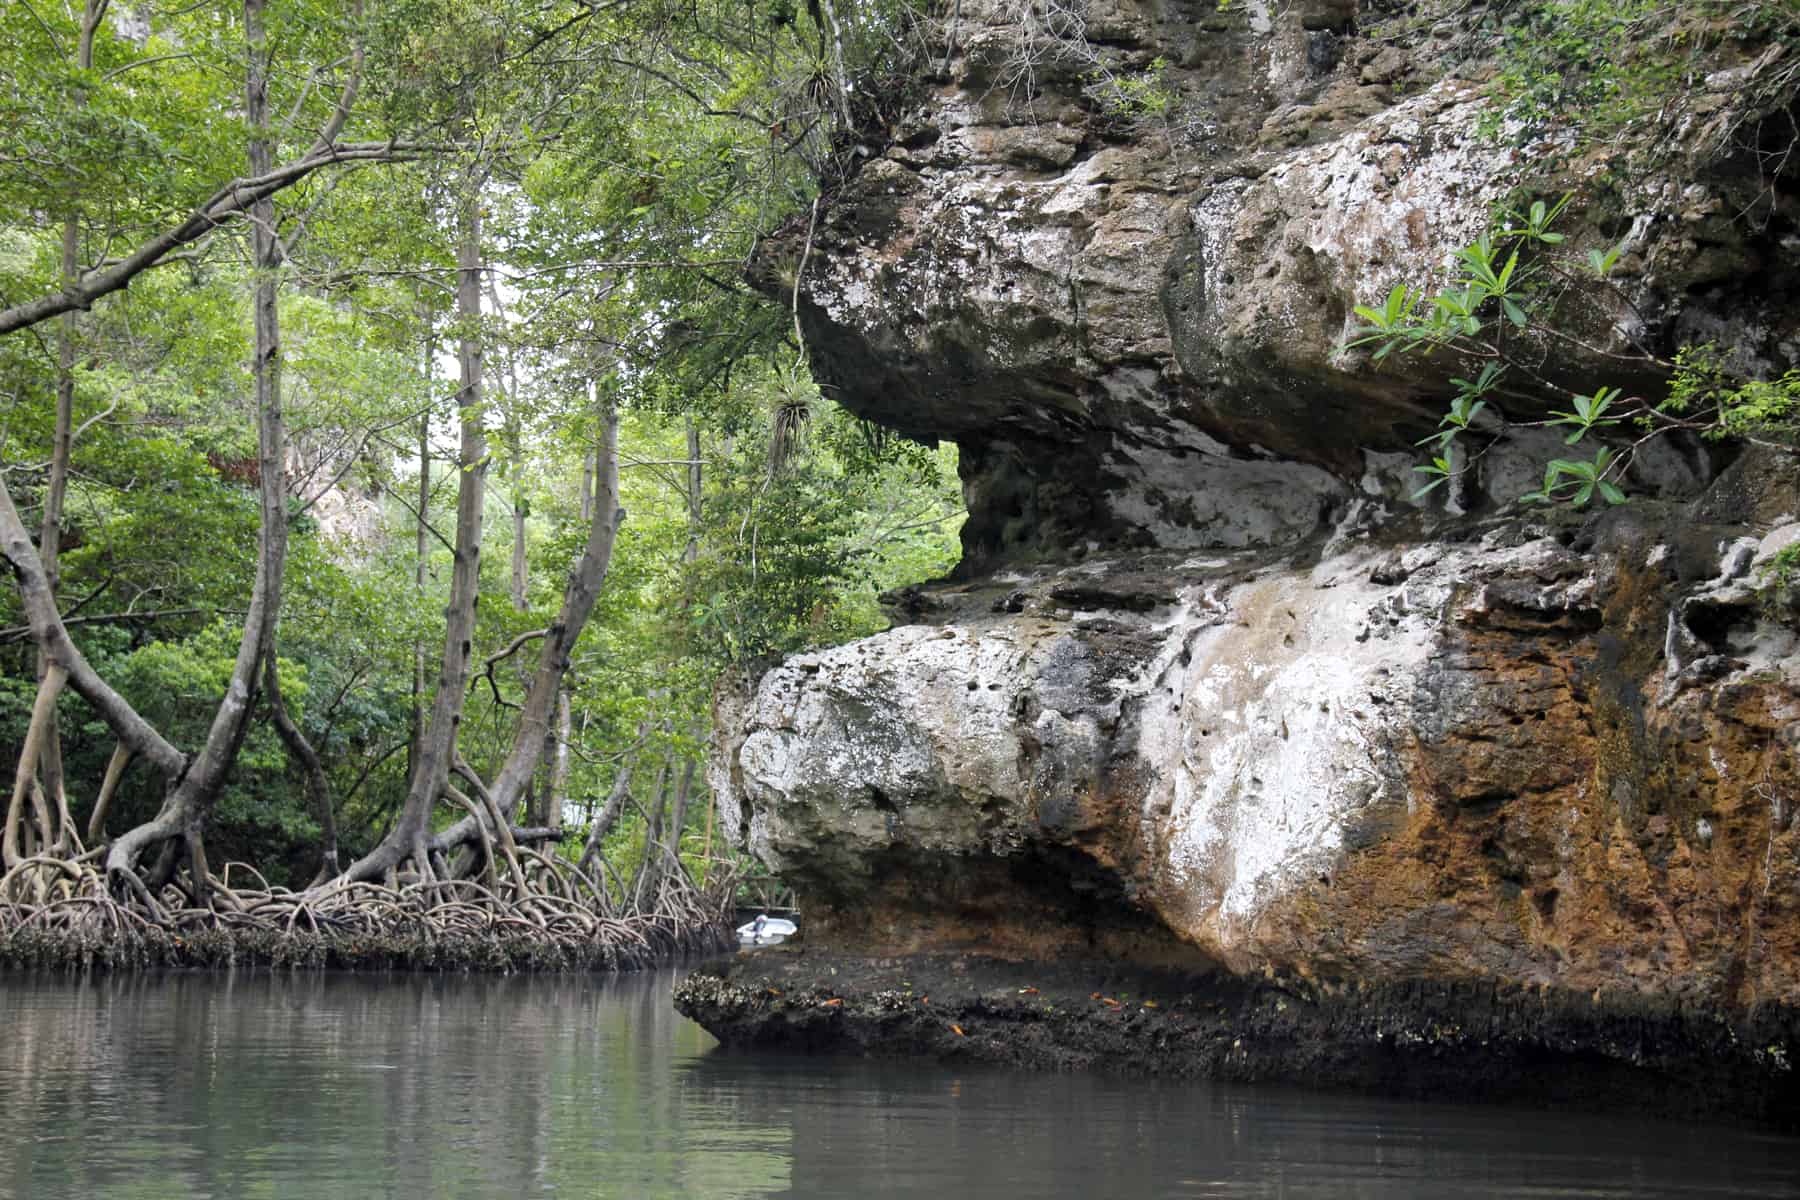 Here is a karst formation and mangrove in the Samana Bay of the Los Haitises National Park in the Dominican Republic. This region is part of an activity focused on biodiversity conservation and sustainable tourism.